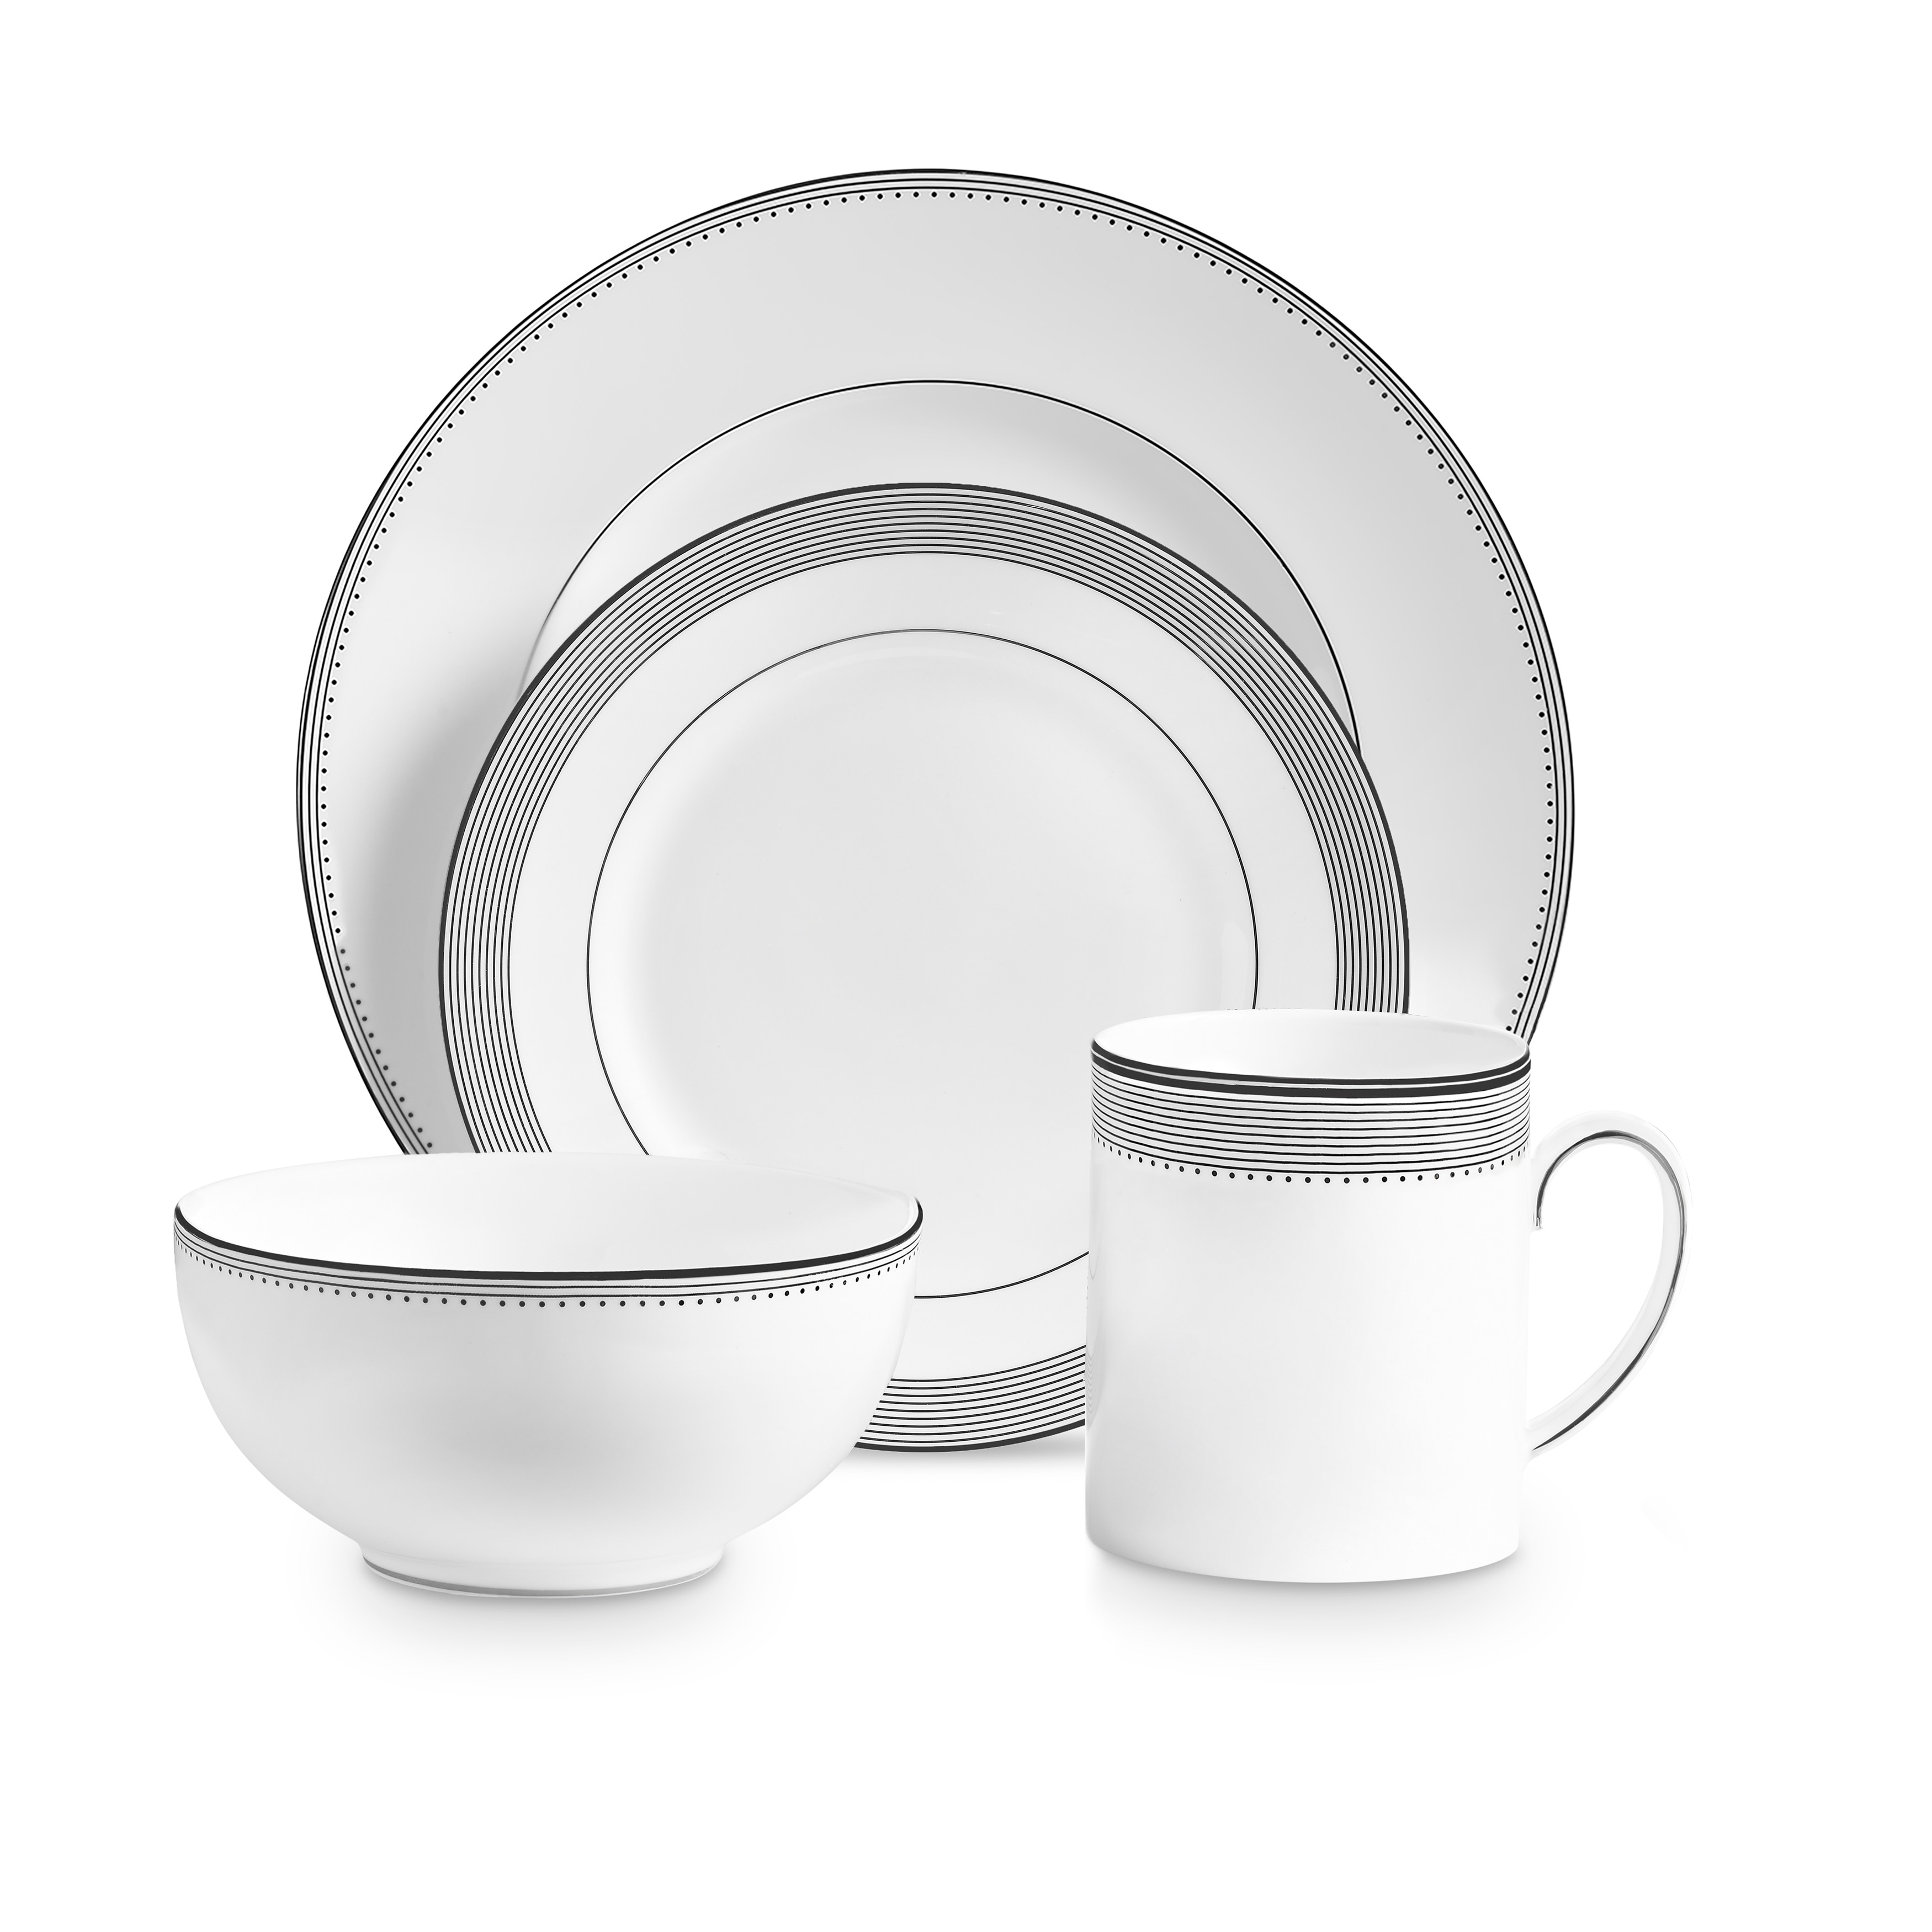 Vera Wang Wedgwood Grosgrain 5-Piece Place Setting, Service for by Wedgwood - 3